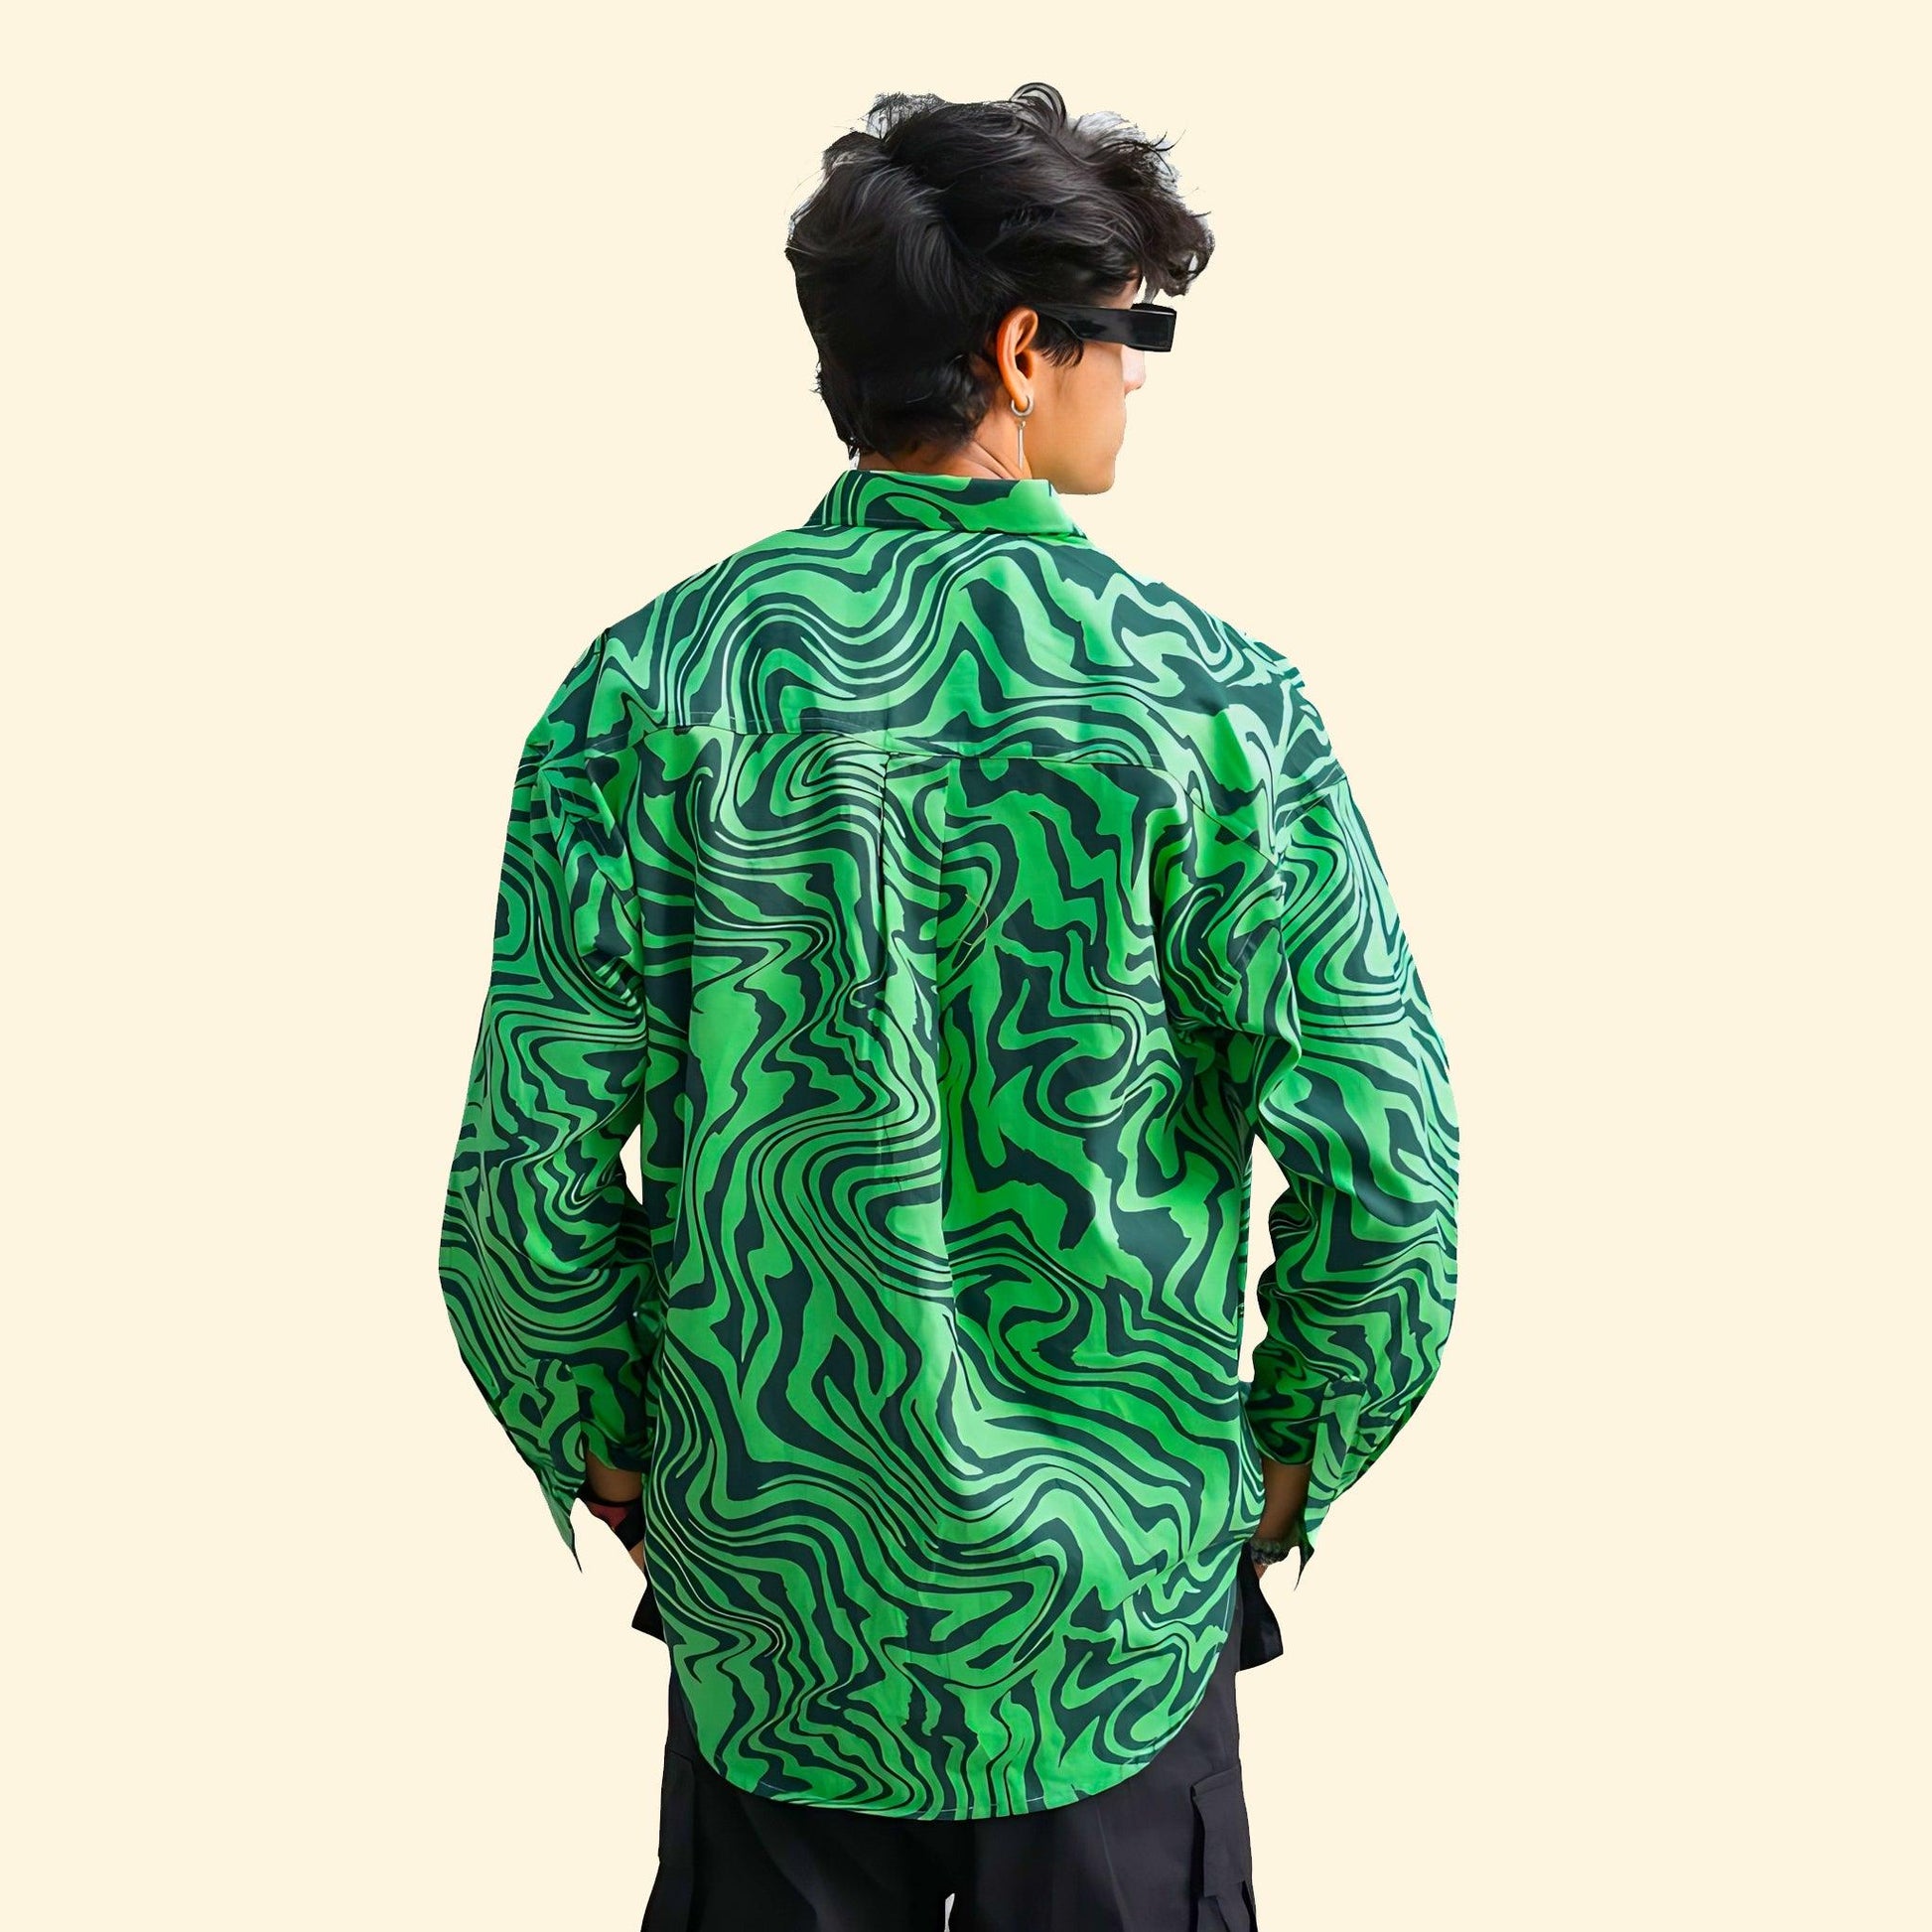 LOOPSTER Men's Green Zebra Design Baggy Fit Shirt With Double Pockets - Loopster